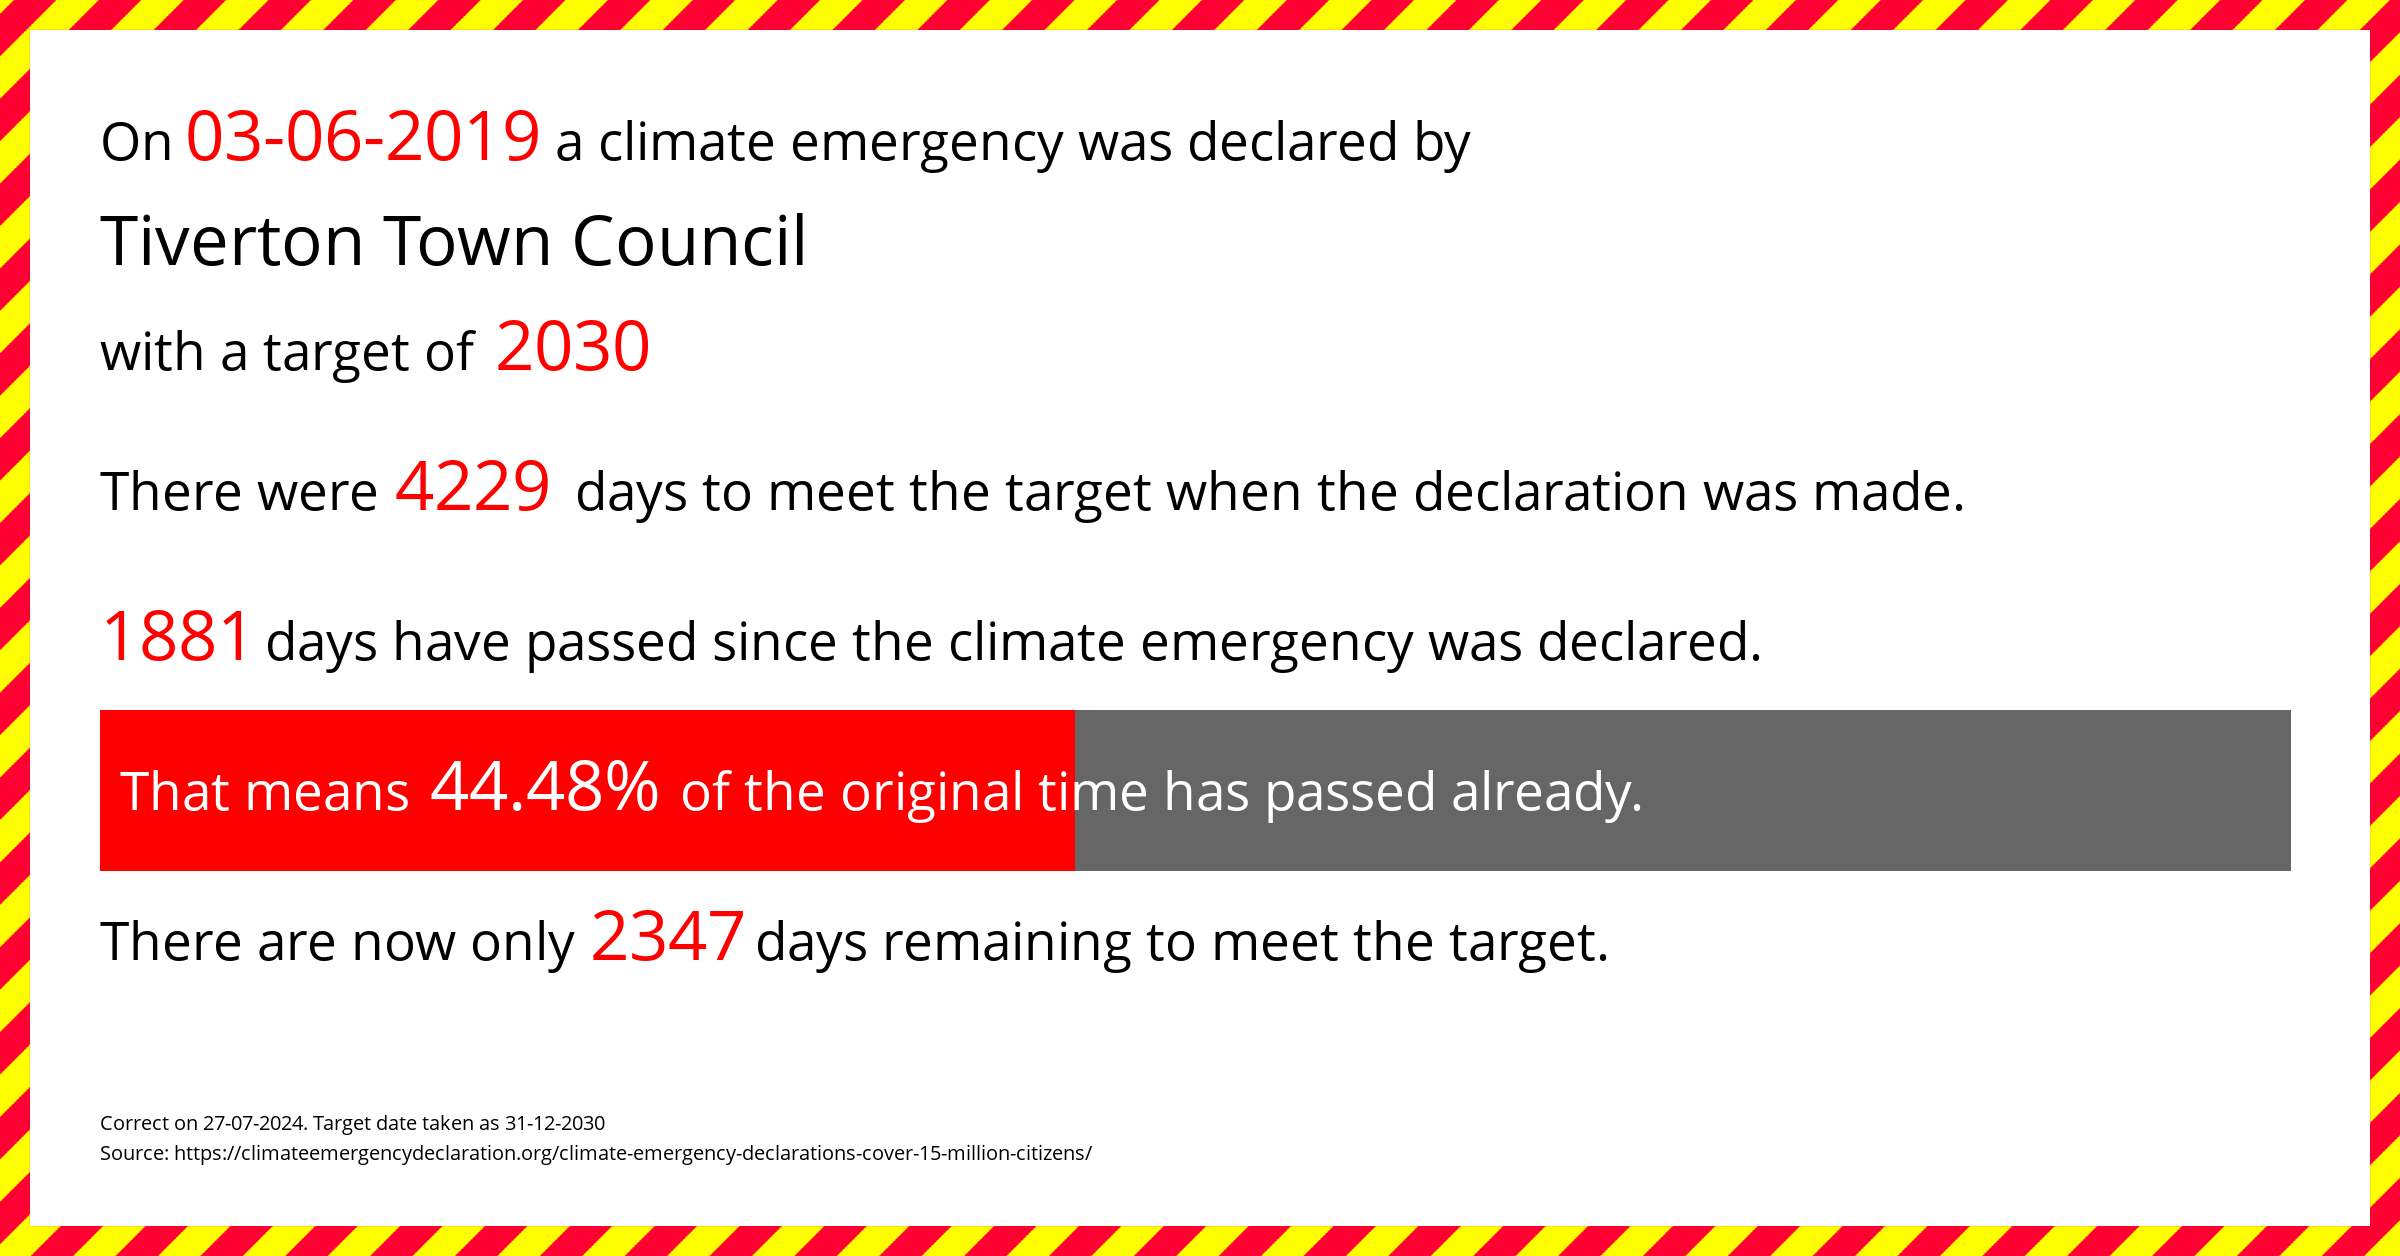 Tiverton Town Council declared a Climate emergency on Monday 3rd June 2019, with a target of 2030.